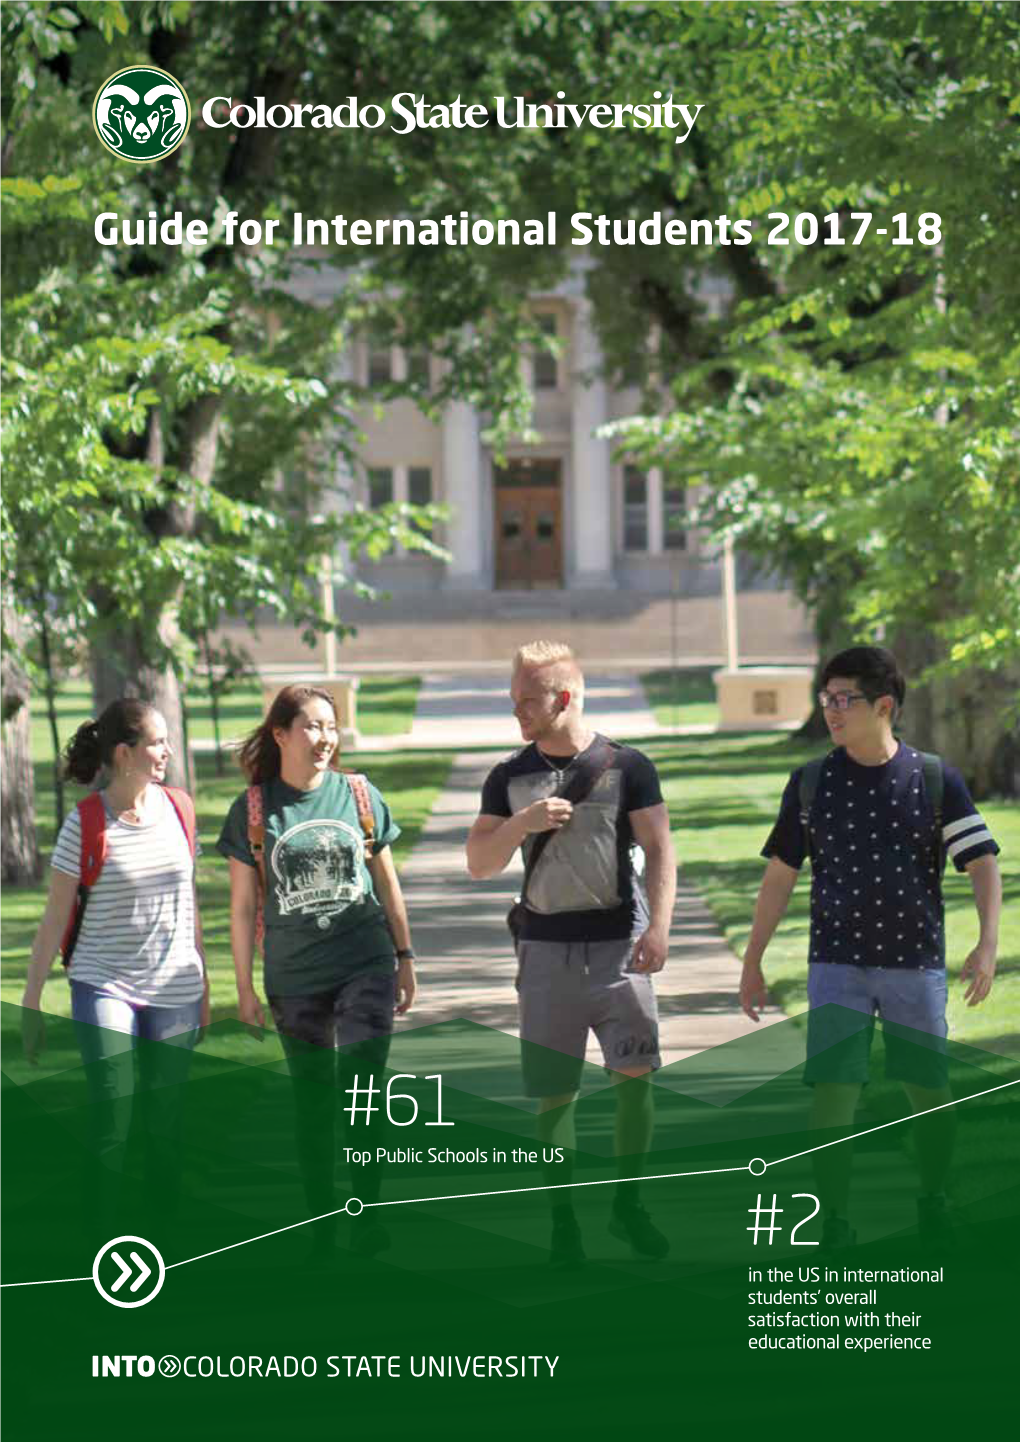 2 in the US in International Students’ Overall Satisfaction with Their Educational Experience #127 Best US National Universities (U.S